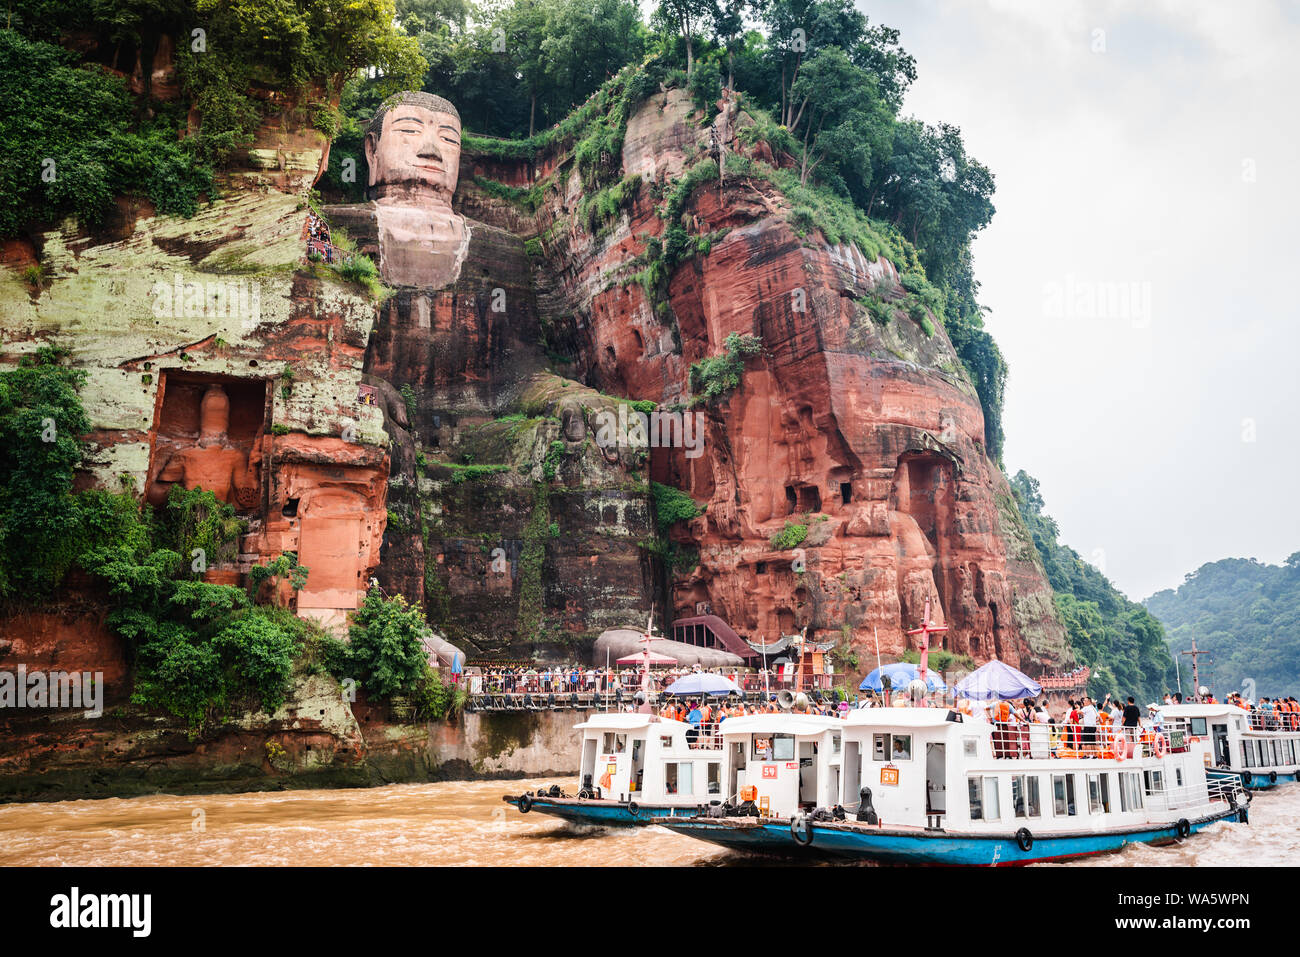 Leshan China, 5 August 2019 : View of the Leshan Giant Buddha and tourists boats on Min river in Leshan Sichuan China Stock Photo